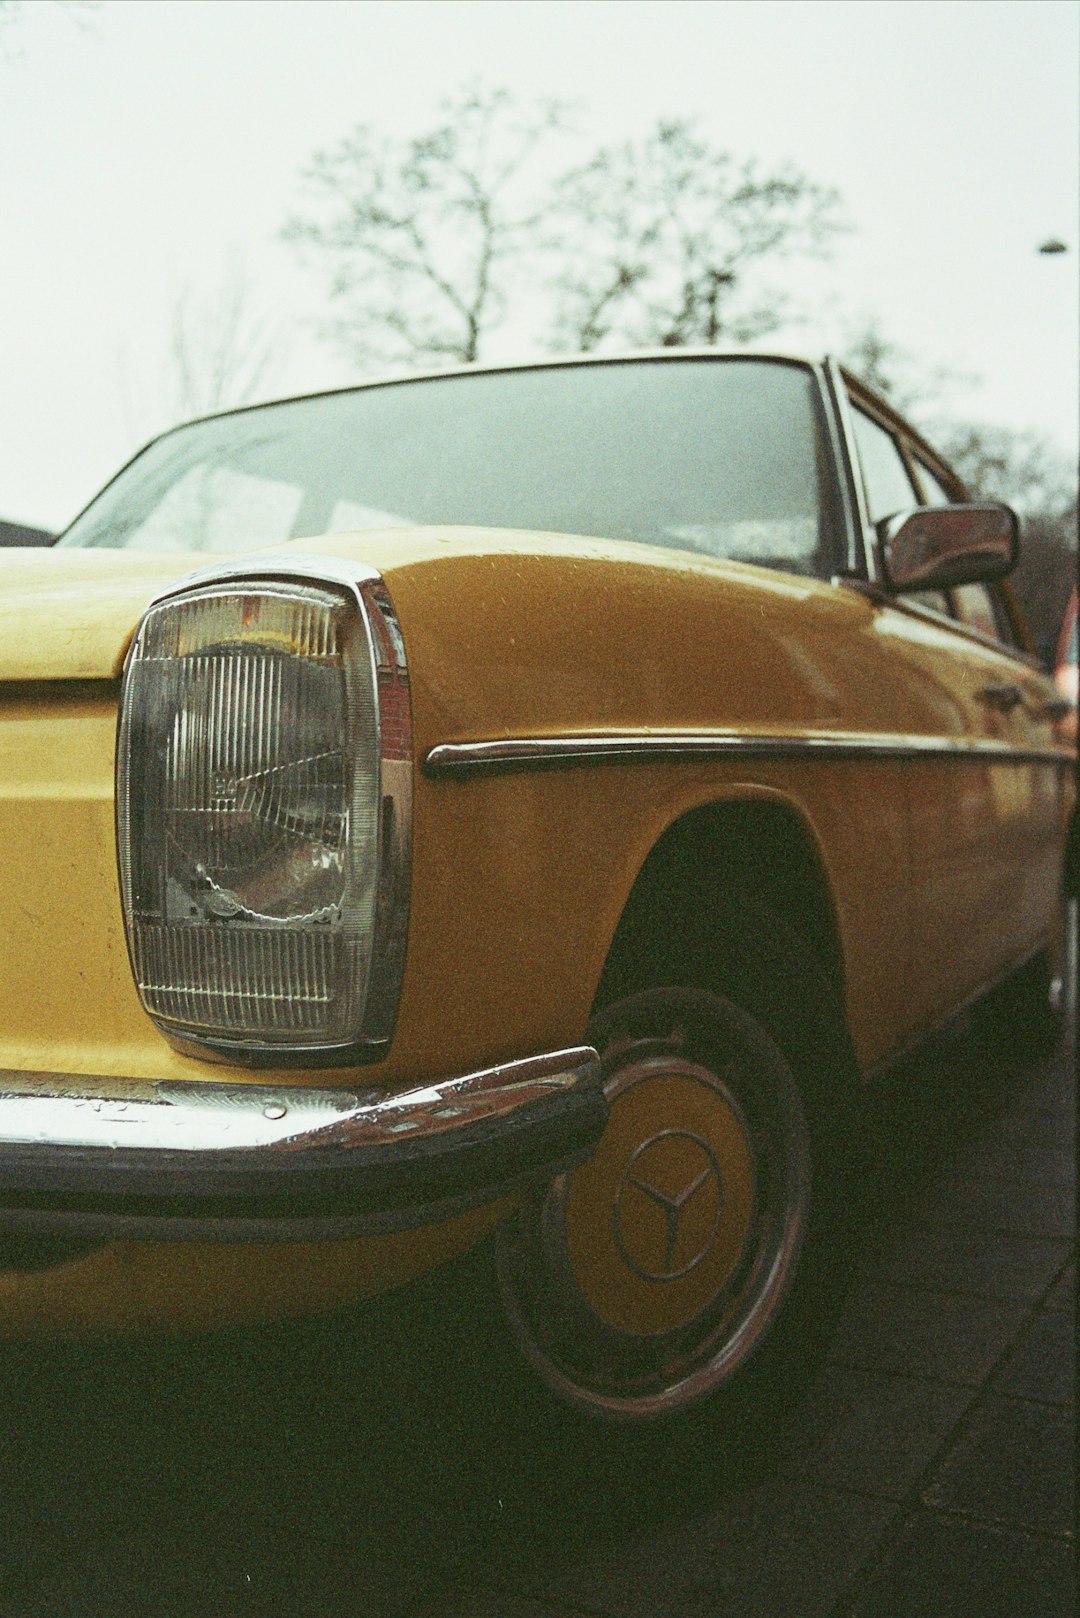 yellow and black car on gray pavement